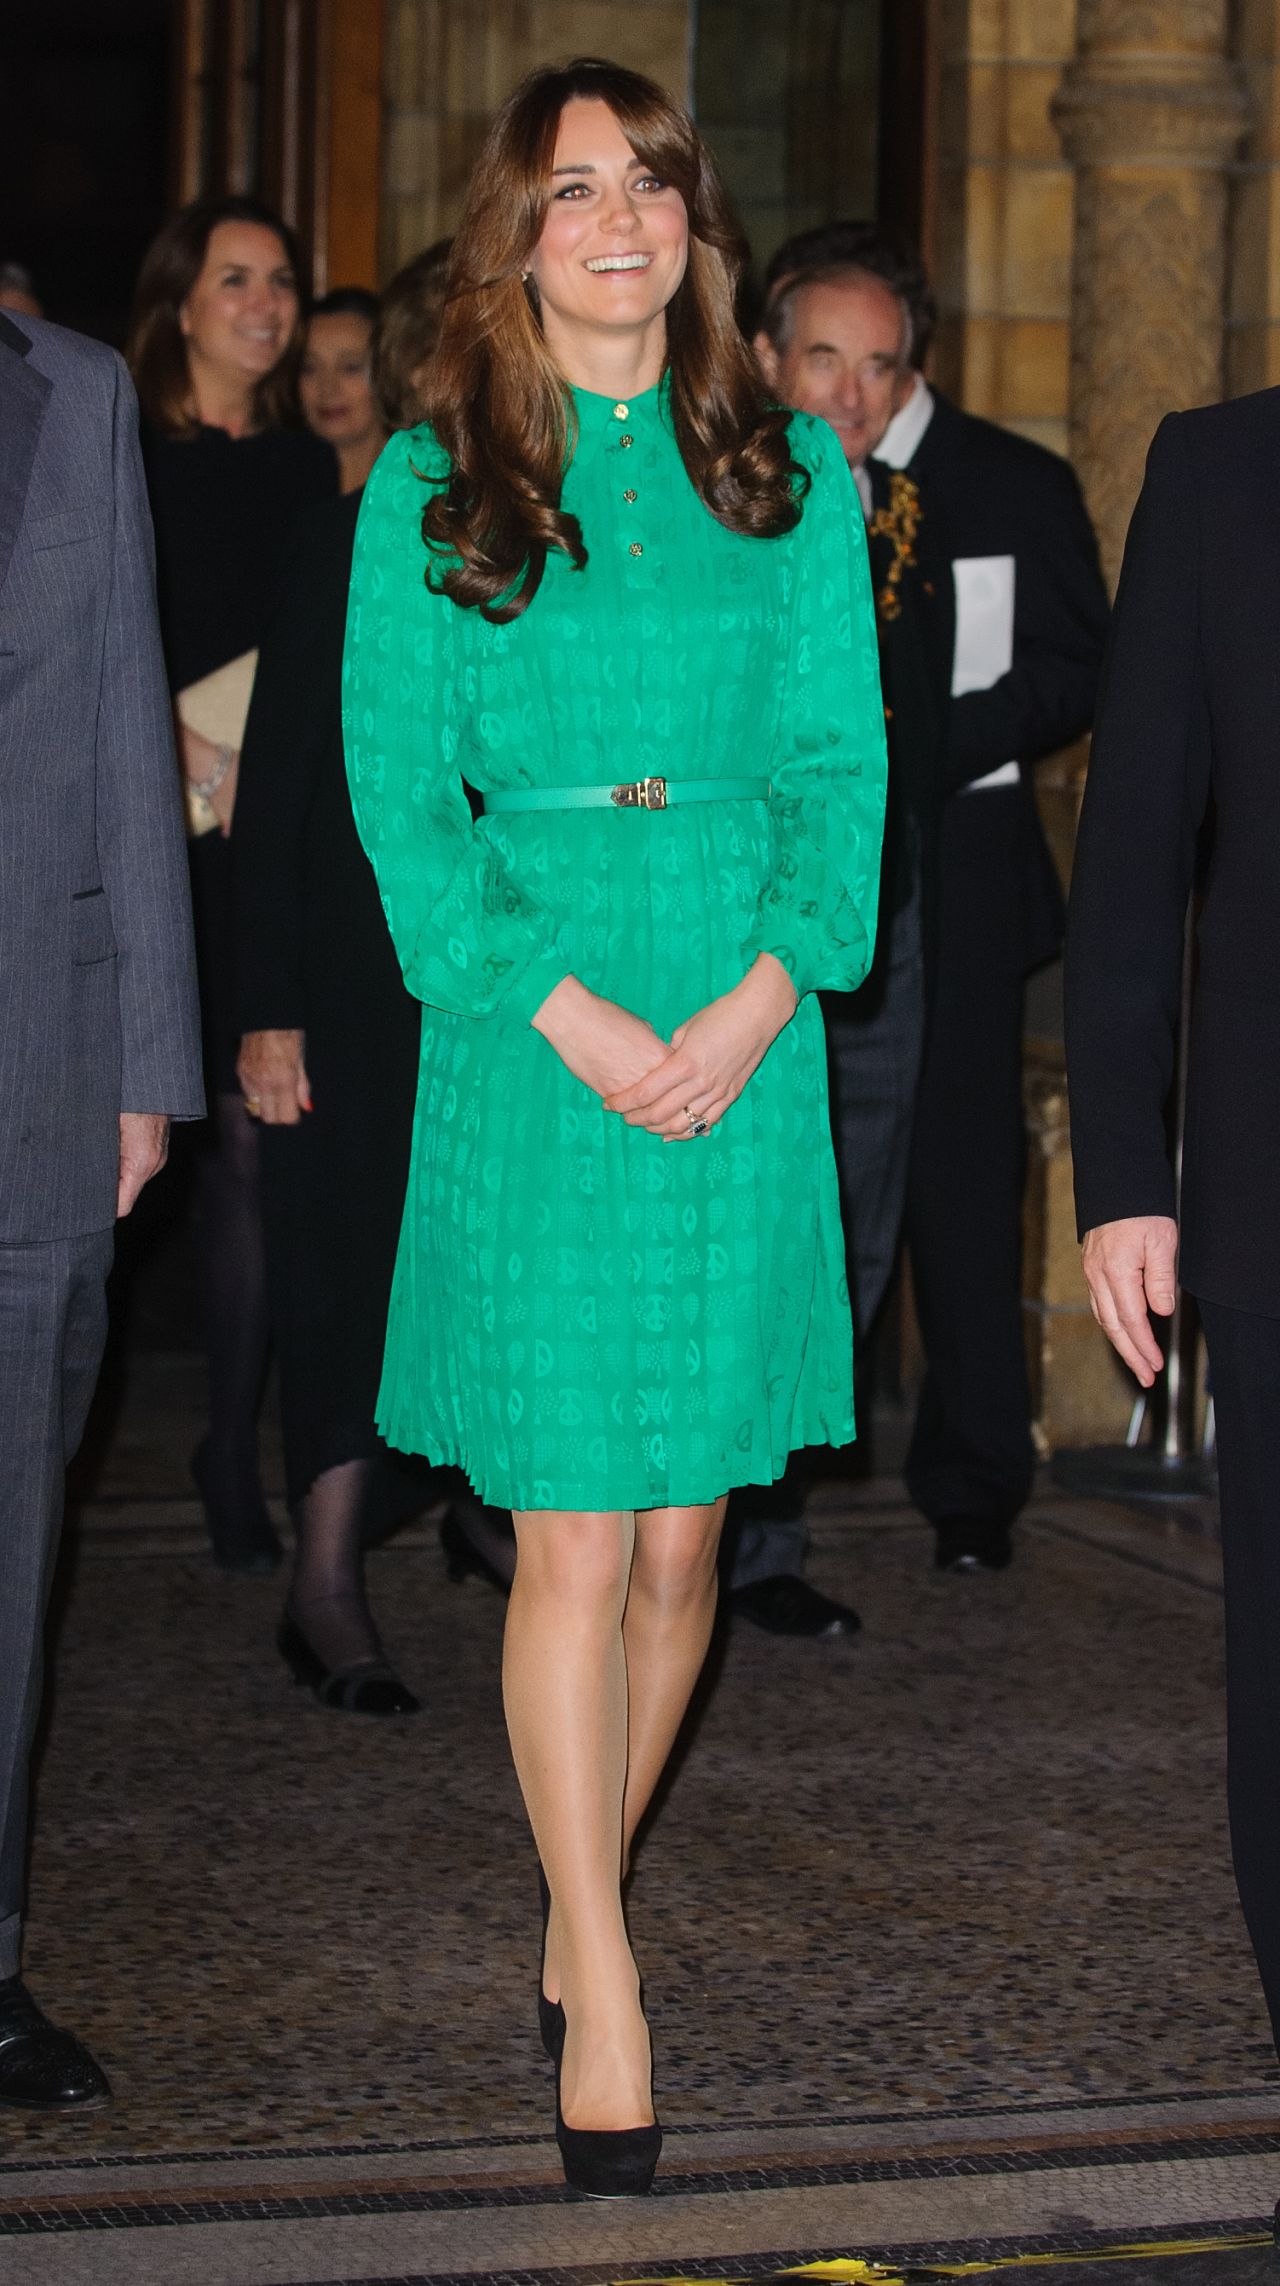 Showing off her new 'do on November 27, she wore a green Mulberry dress to the opening of The Natural History Museum's Treasures Gallery in London.